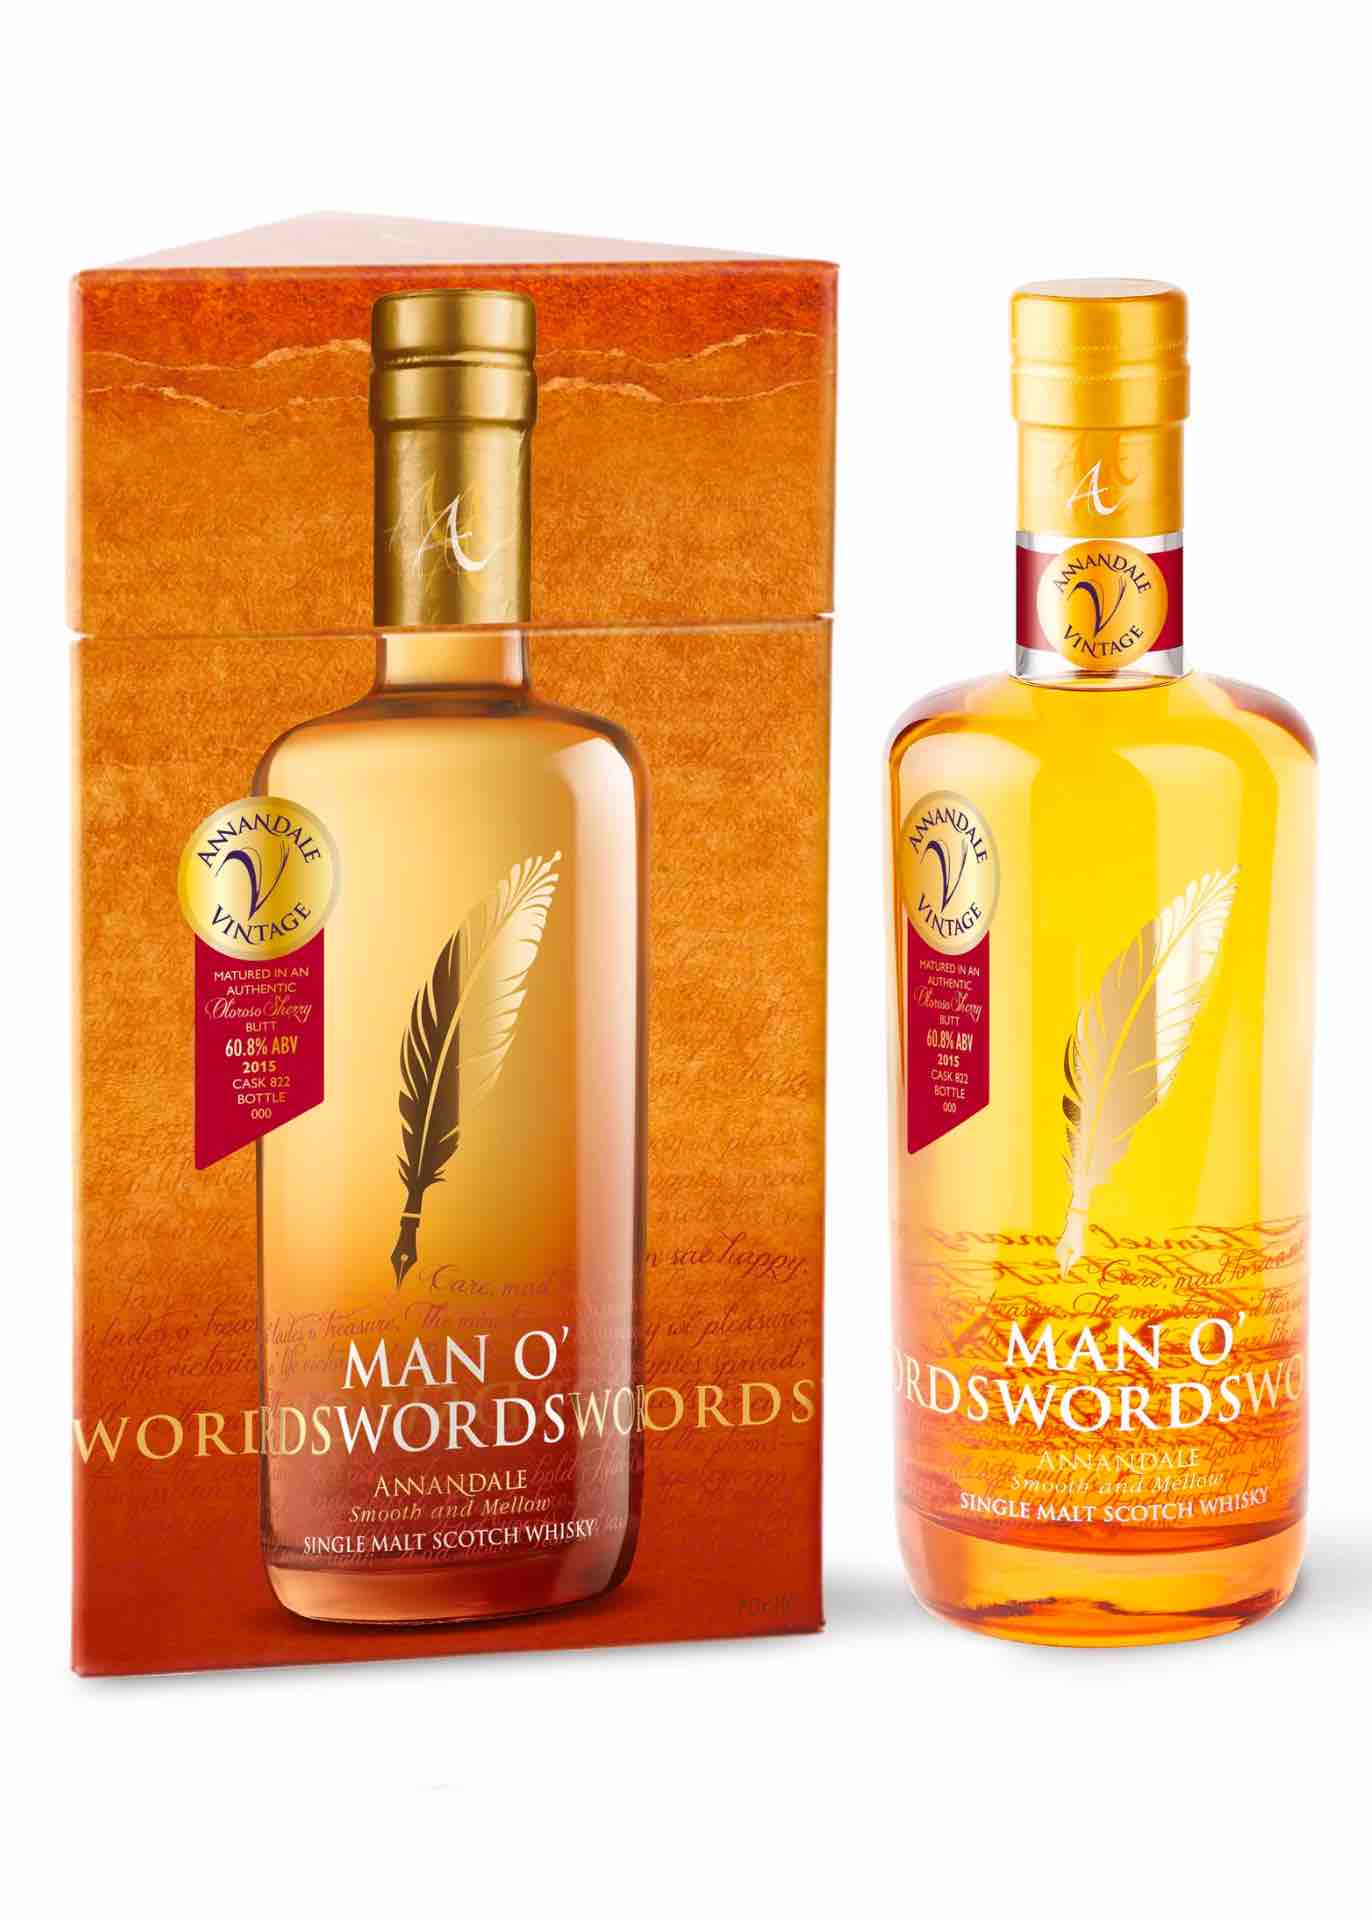 Annandale Man O' Words 2015 Sherry Cask